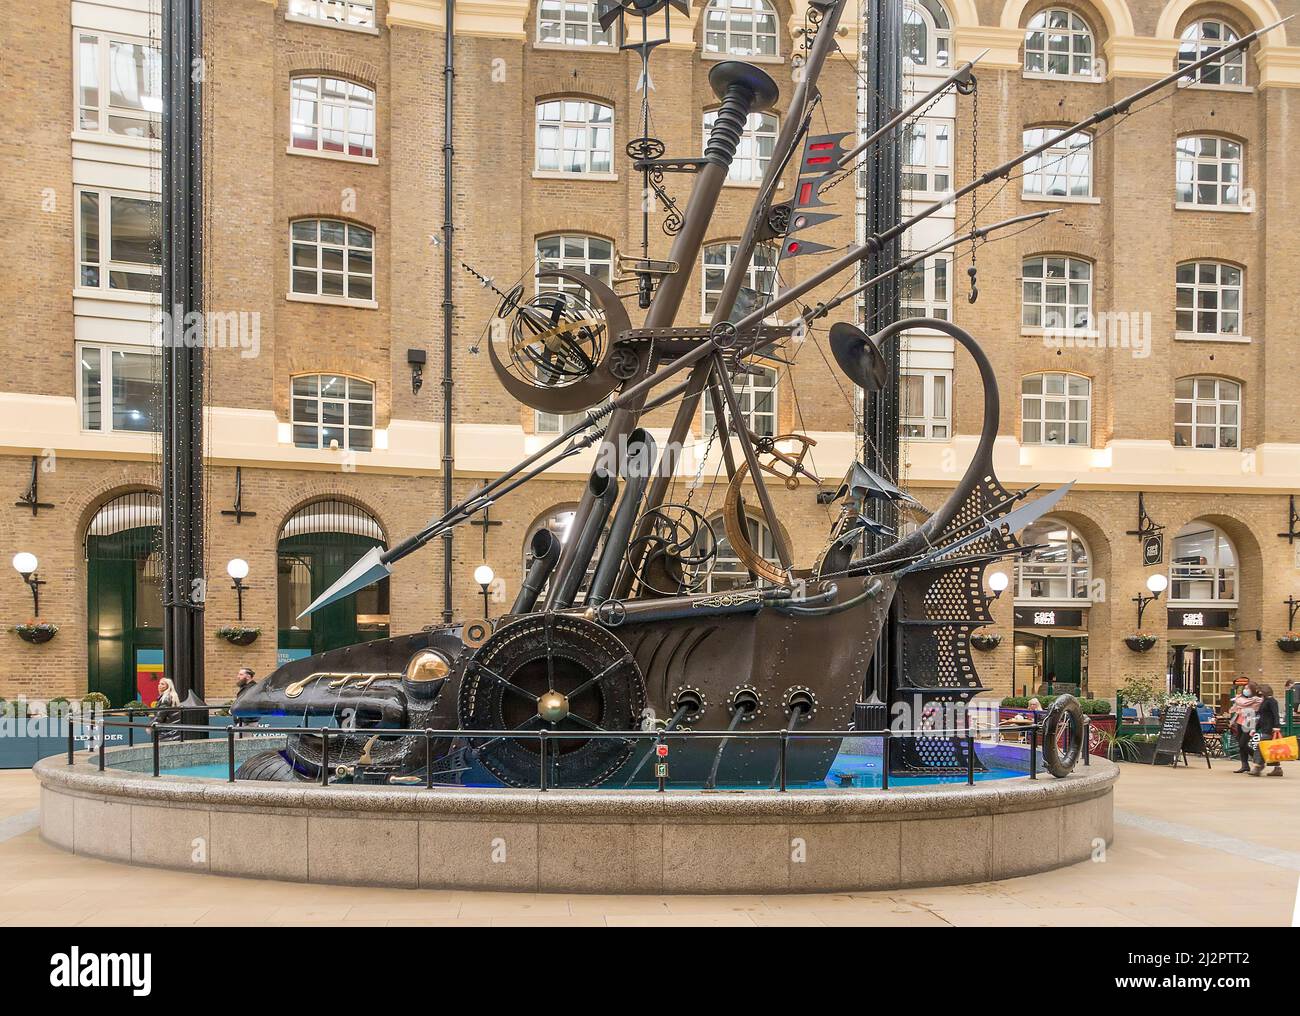 The Navigators kinetic sculpture by David Kemp in Hay's Galleria, River Thames, London, England, UK Stock Photo